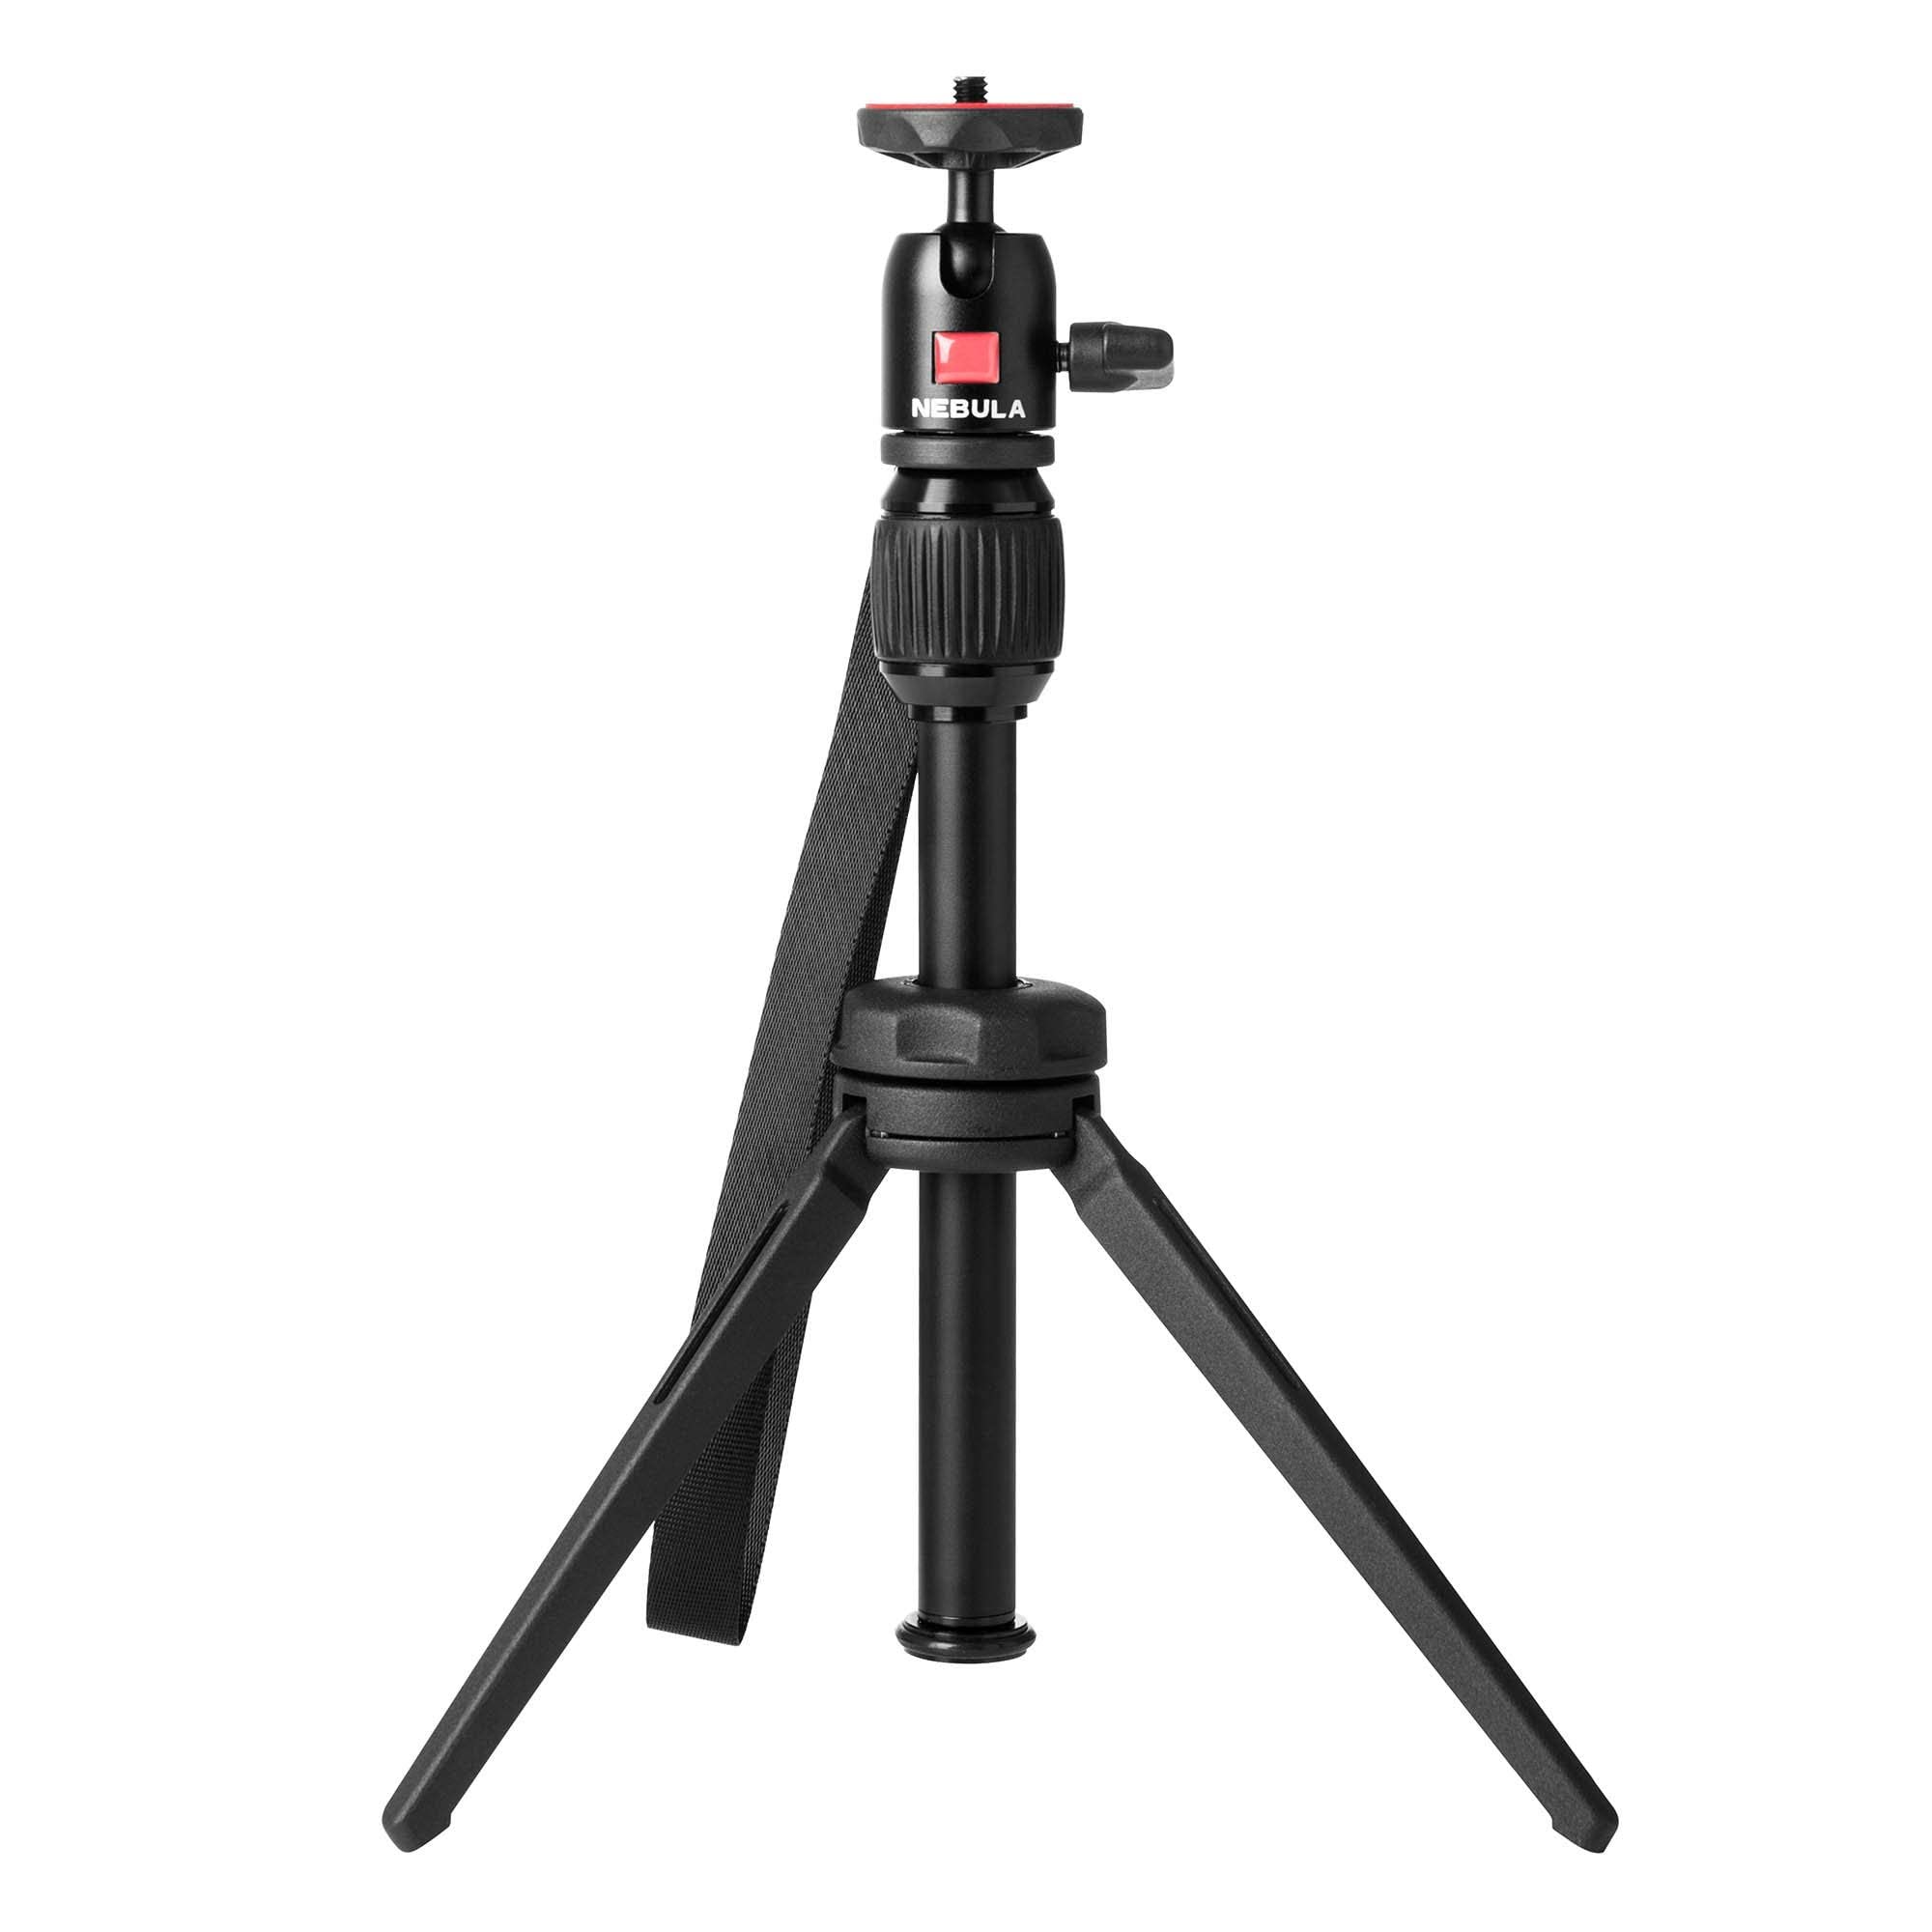 Anker Nebula Capsule Max with Anker Nebula Capsule Series Adjustable Tripod Stand, Aluminum Alloy Portable Projector Stand